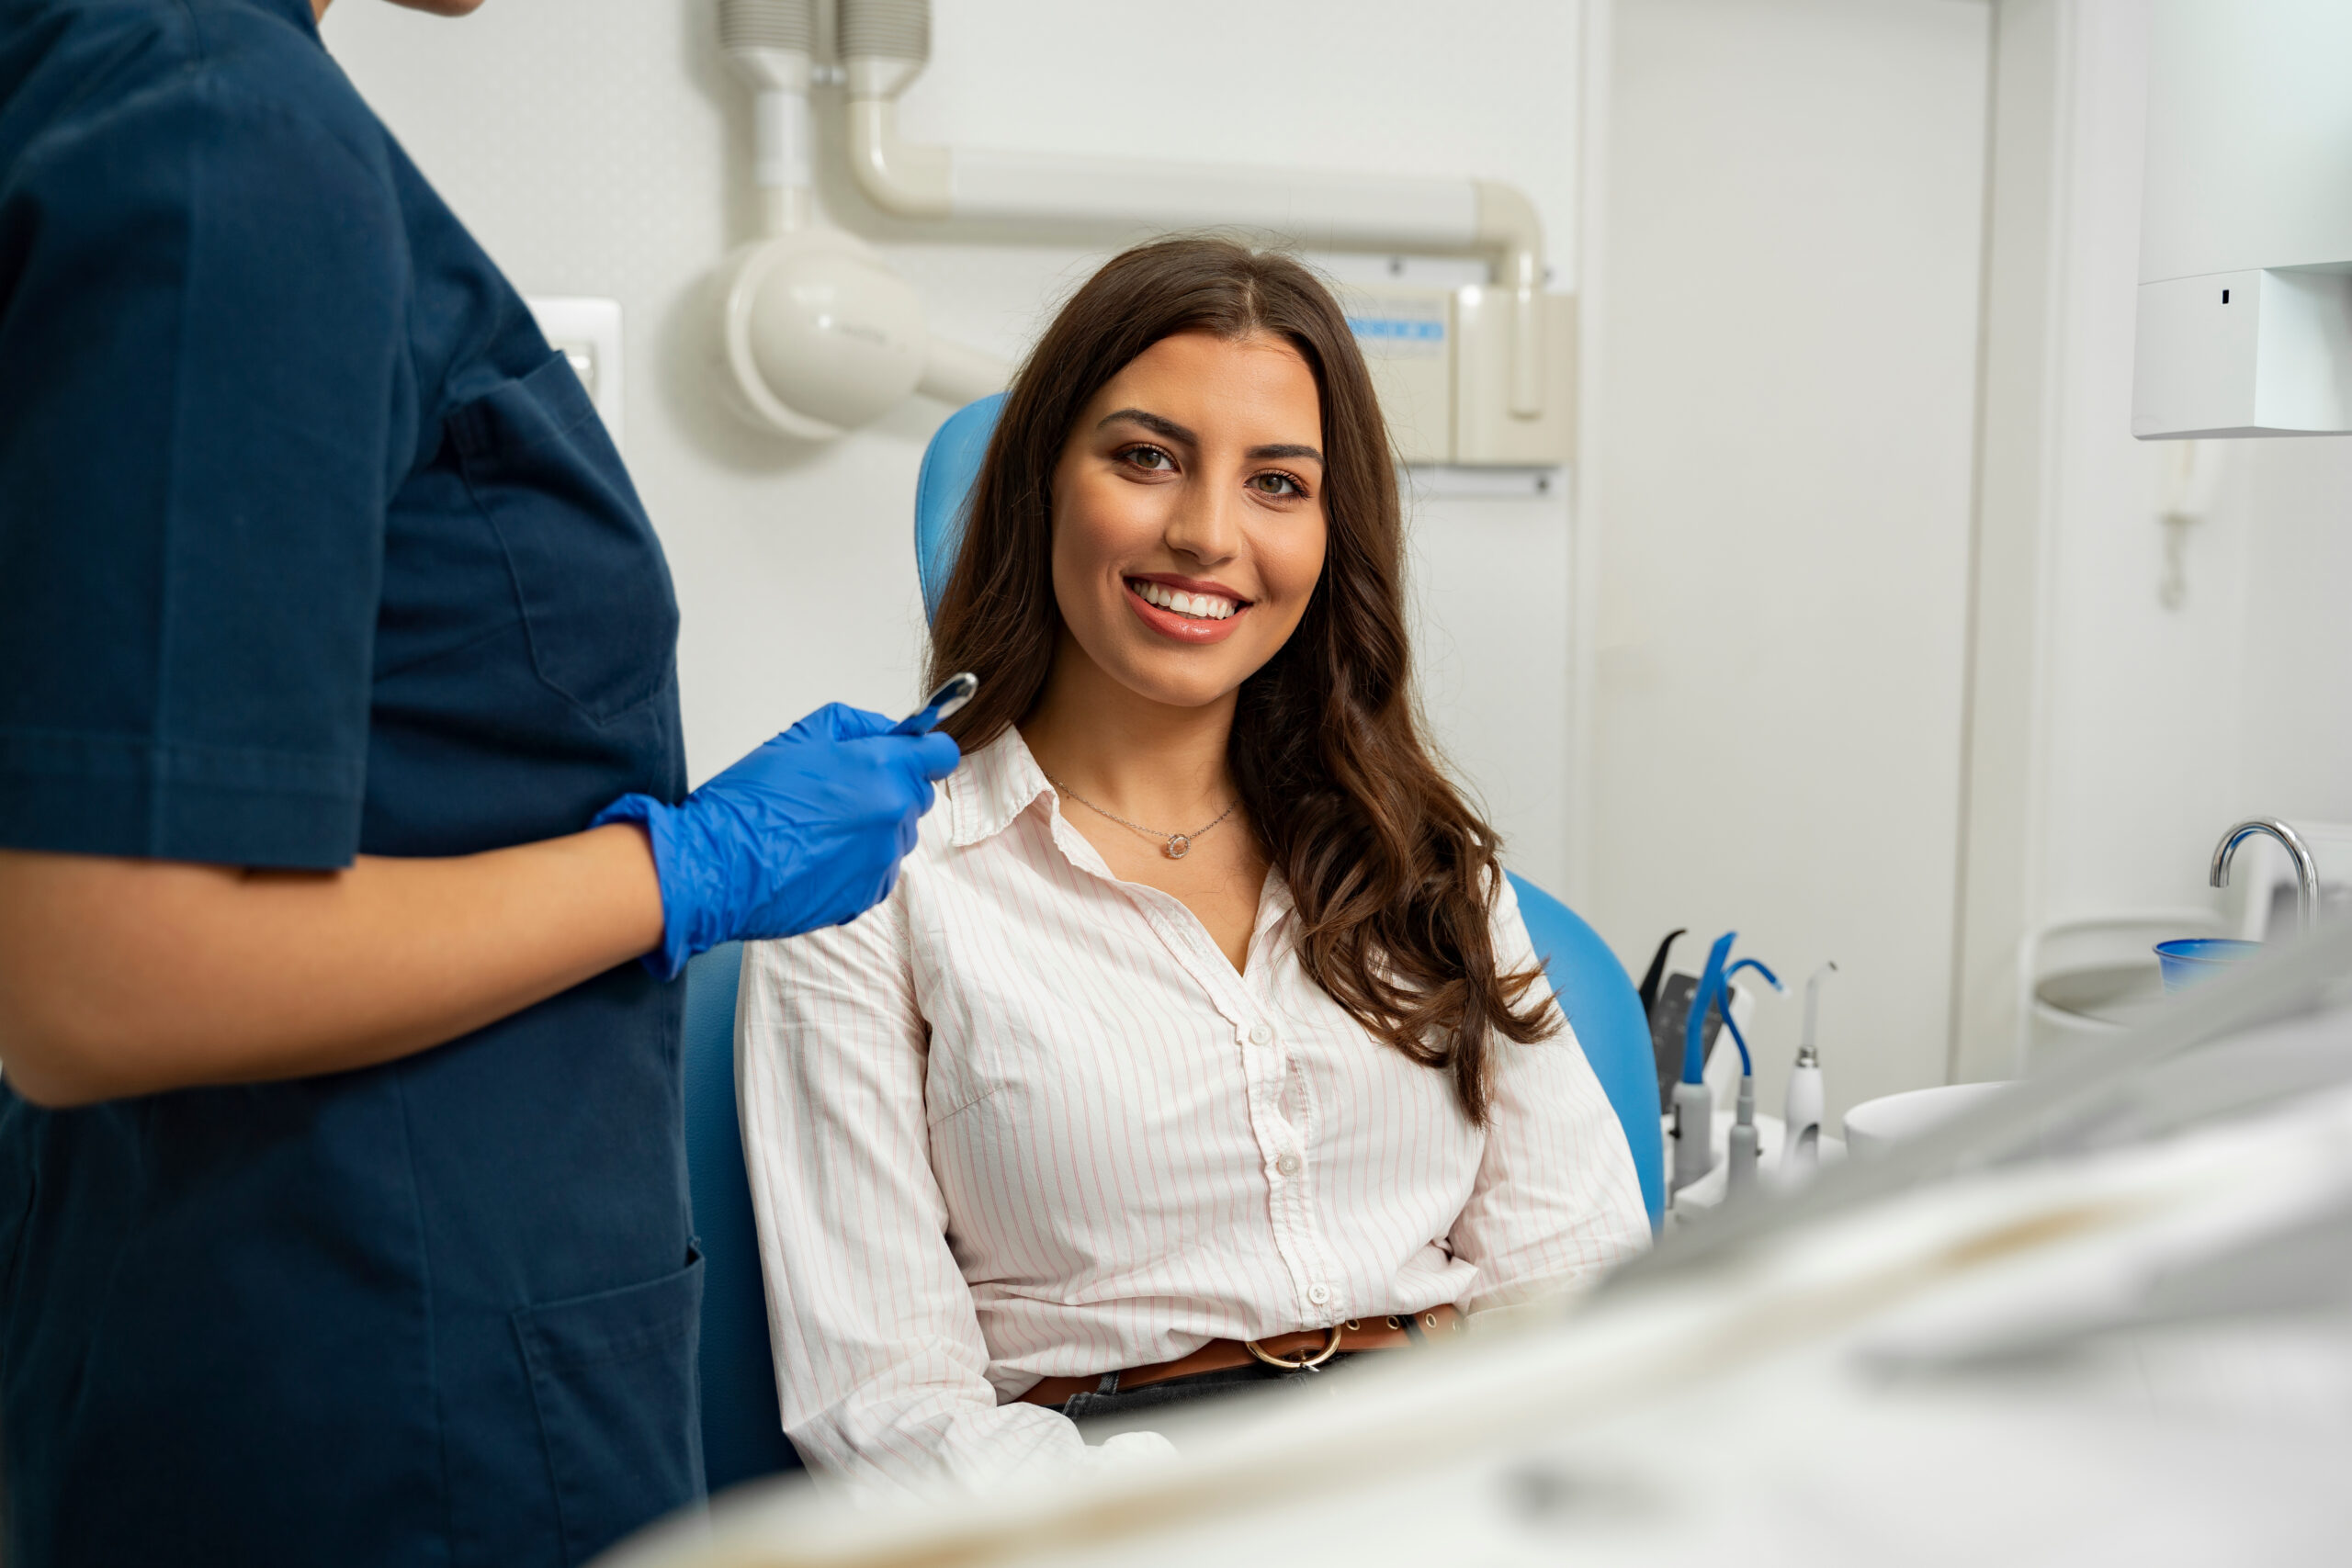 Satisfied patient sitting in dentist chair. Gorgeous young woman